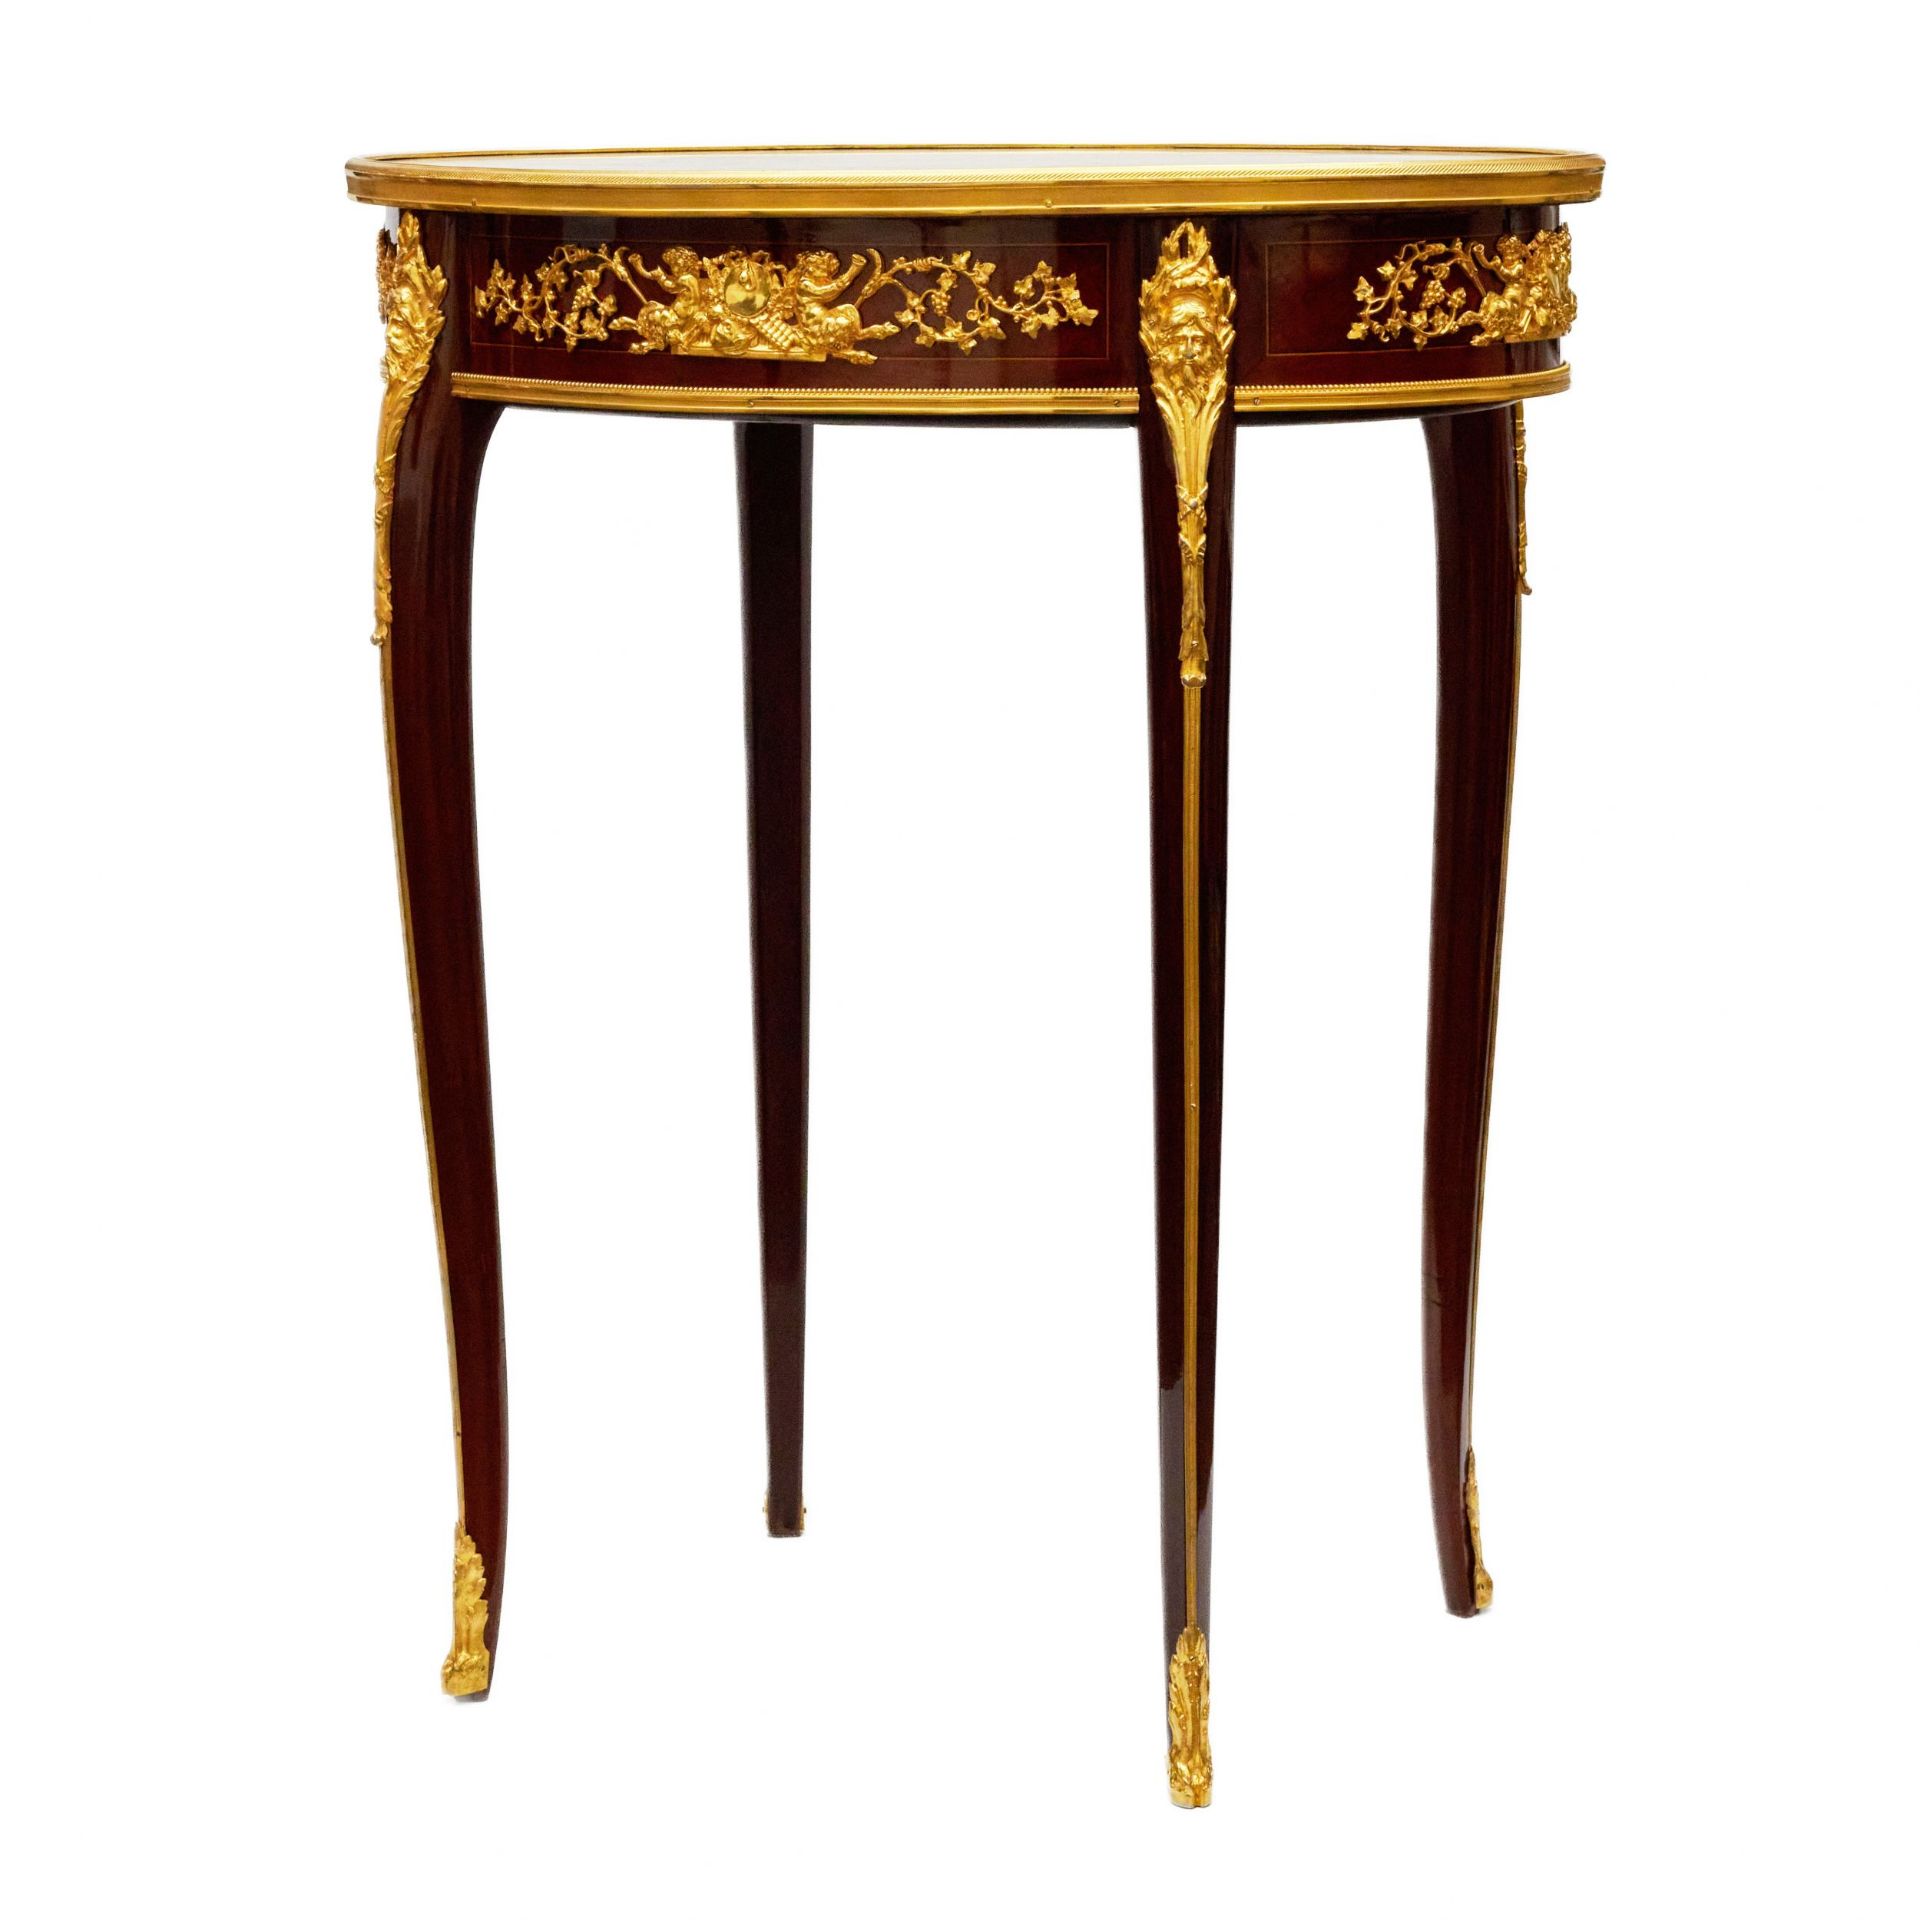 Magnificent mahogany and gilded bronze table by Francois Linke. - Image 4 of 5